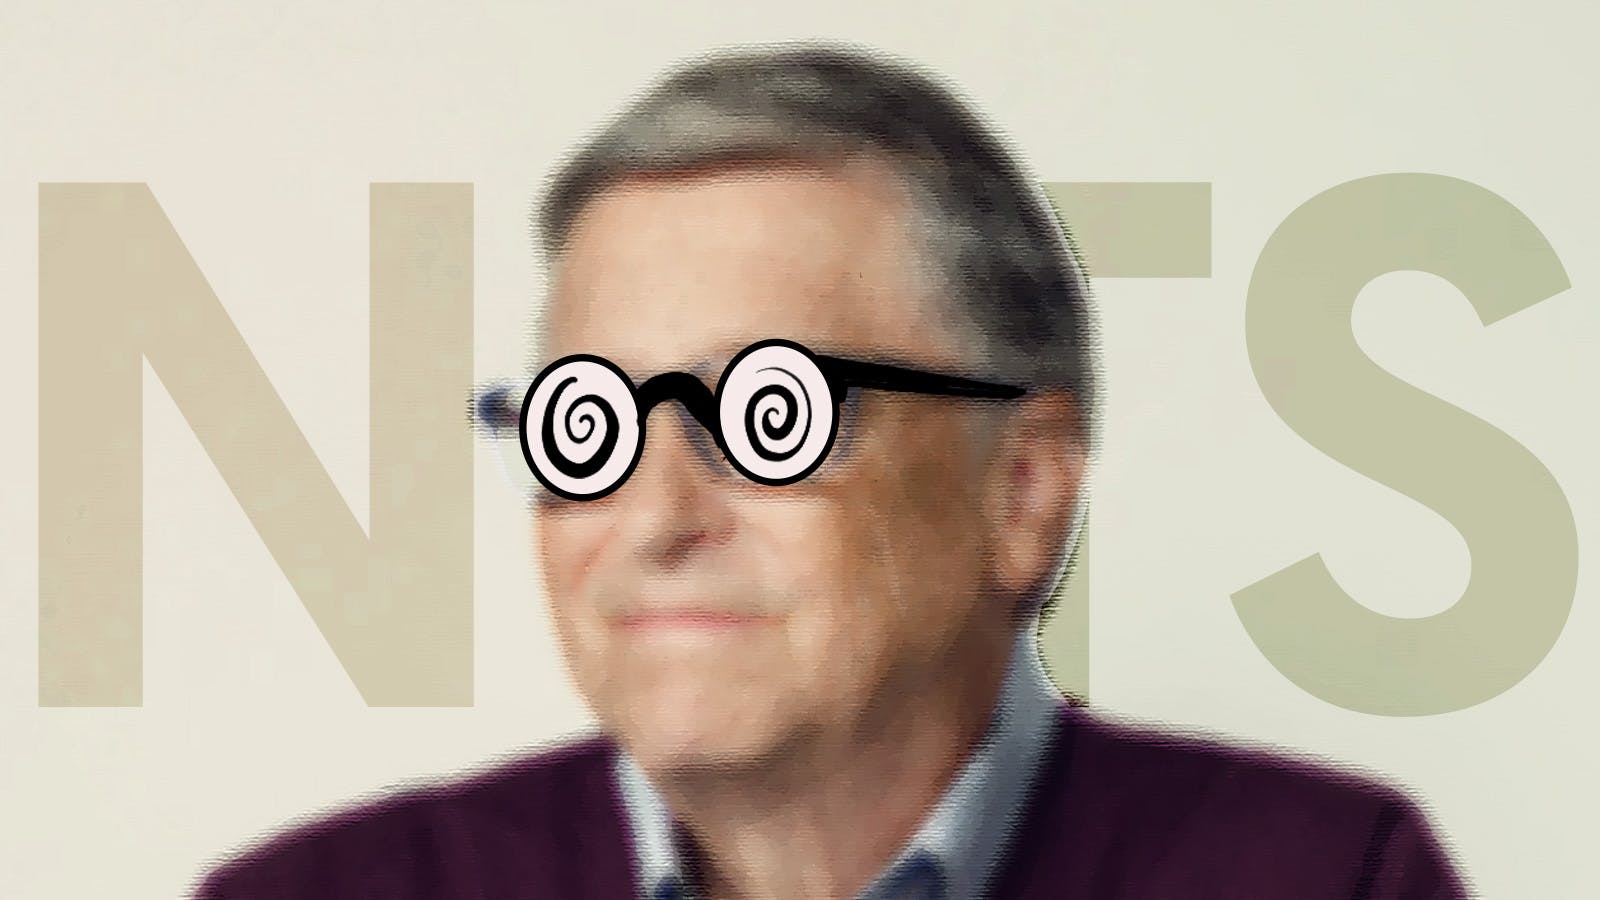 What If Bill Gates is Shortsighted?